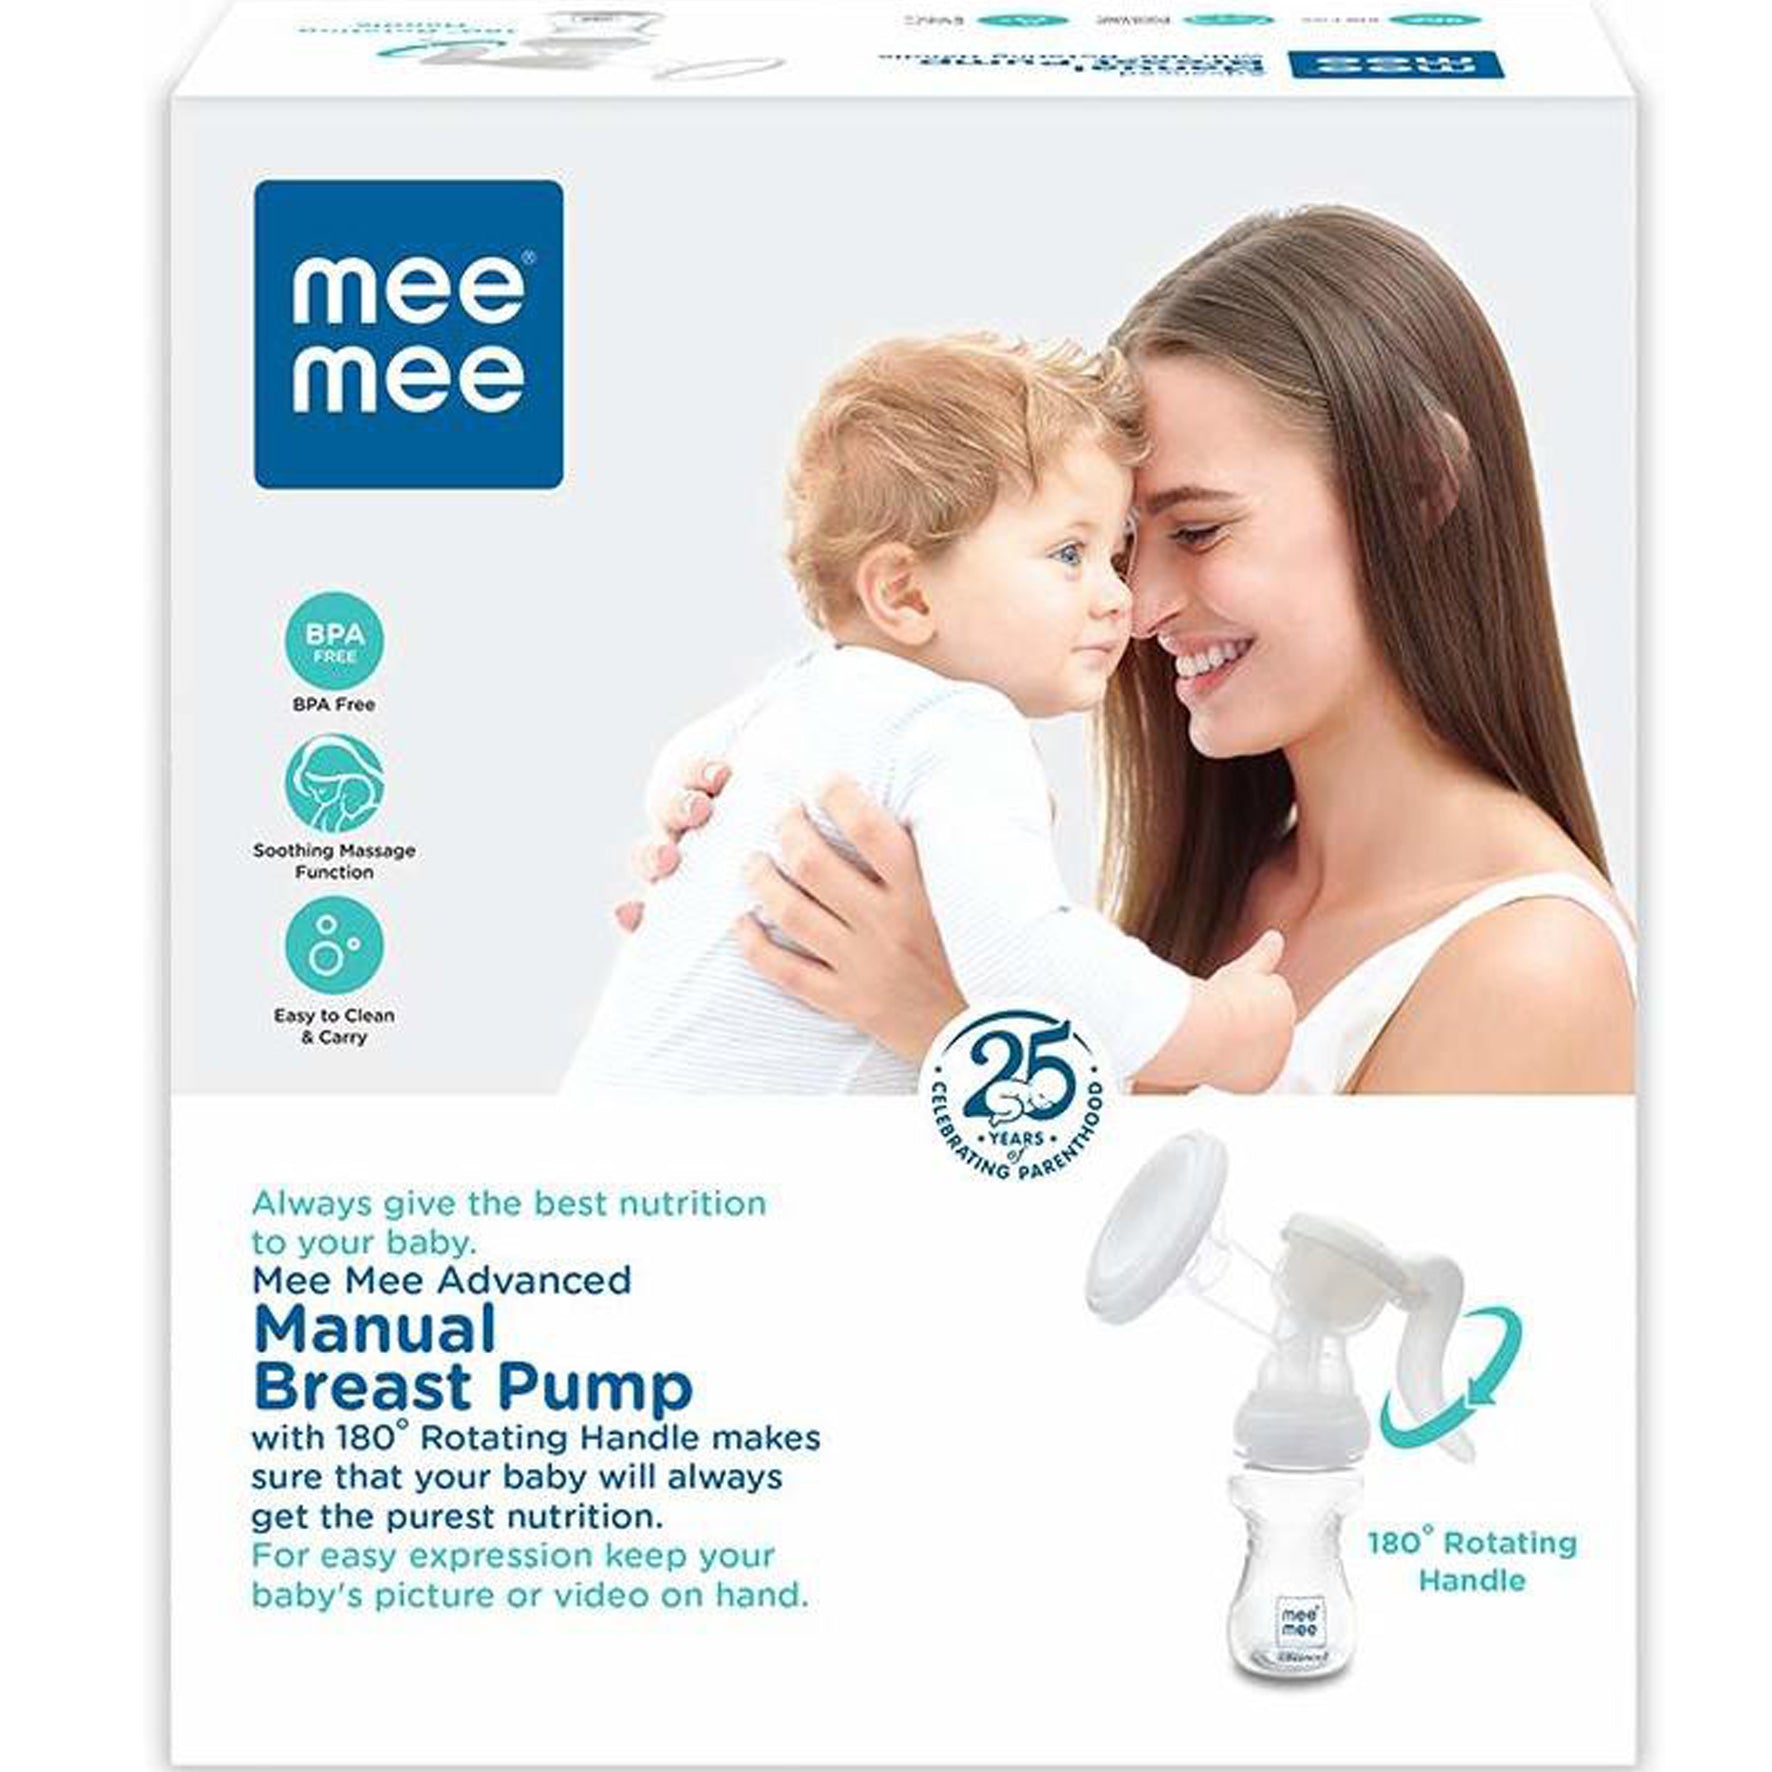 Mee Mee Comfort Manual Breast Pump - BPA-Free, Soft Silicone Shield, Soothing Massage, Portable & Easy to Clean - Perfect for Breastfeeding Mothers